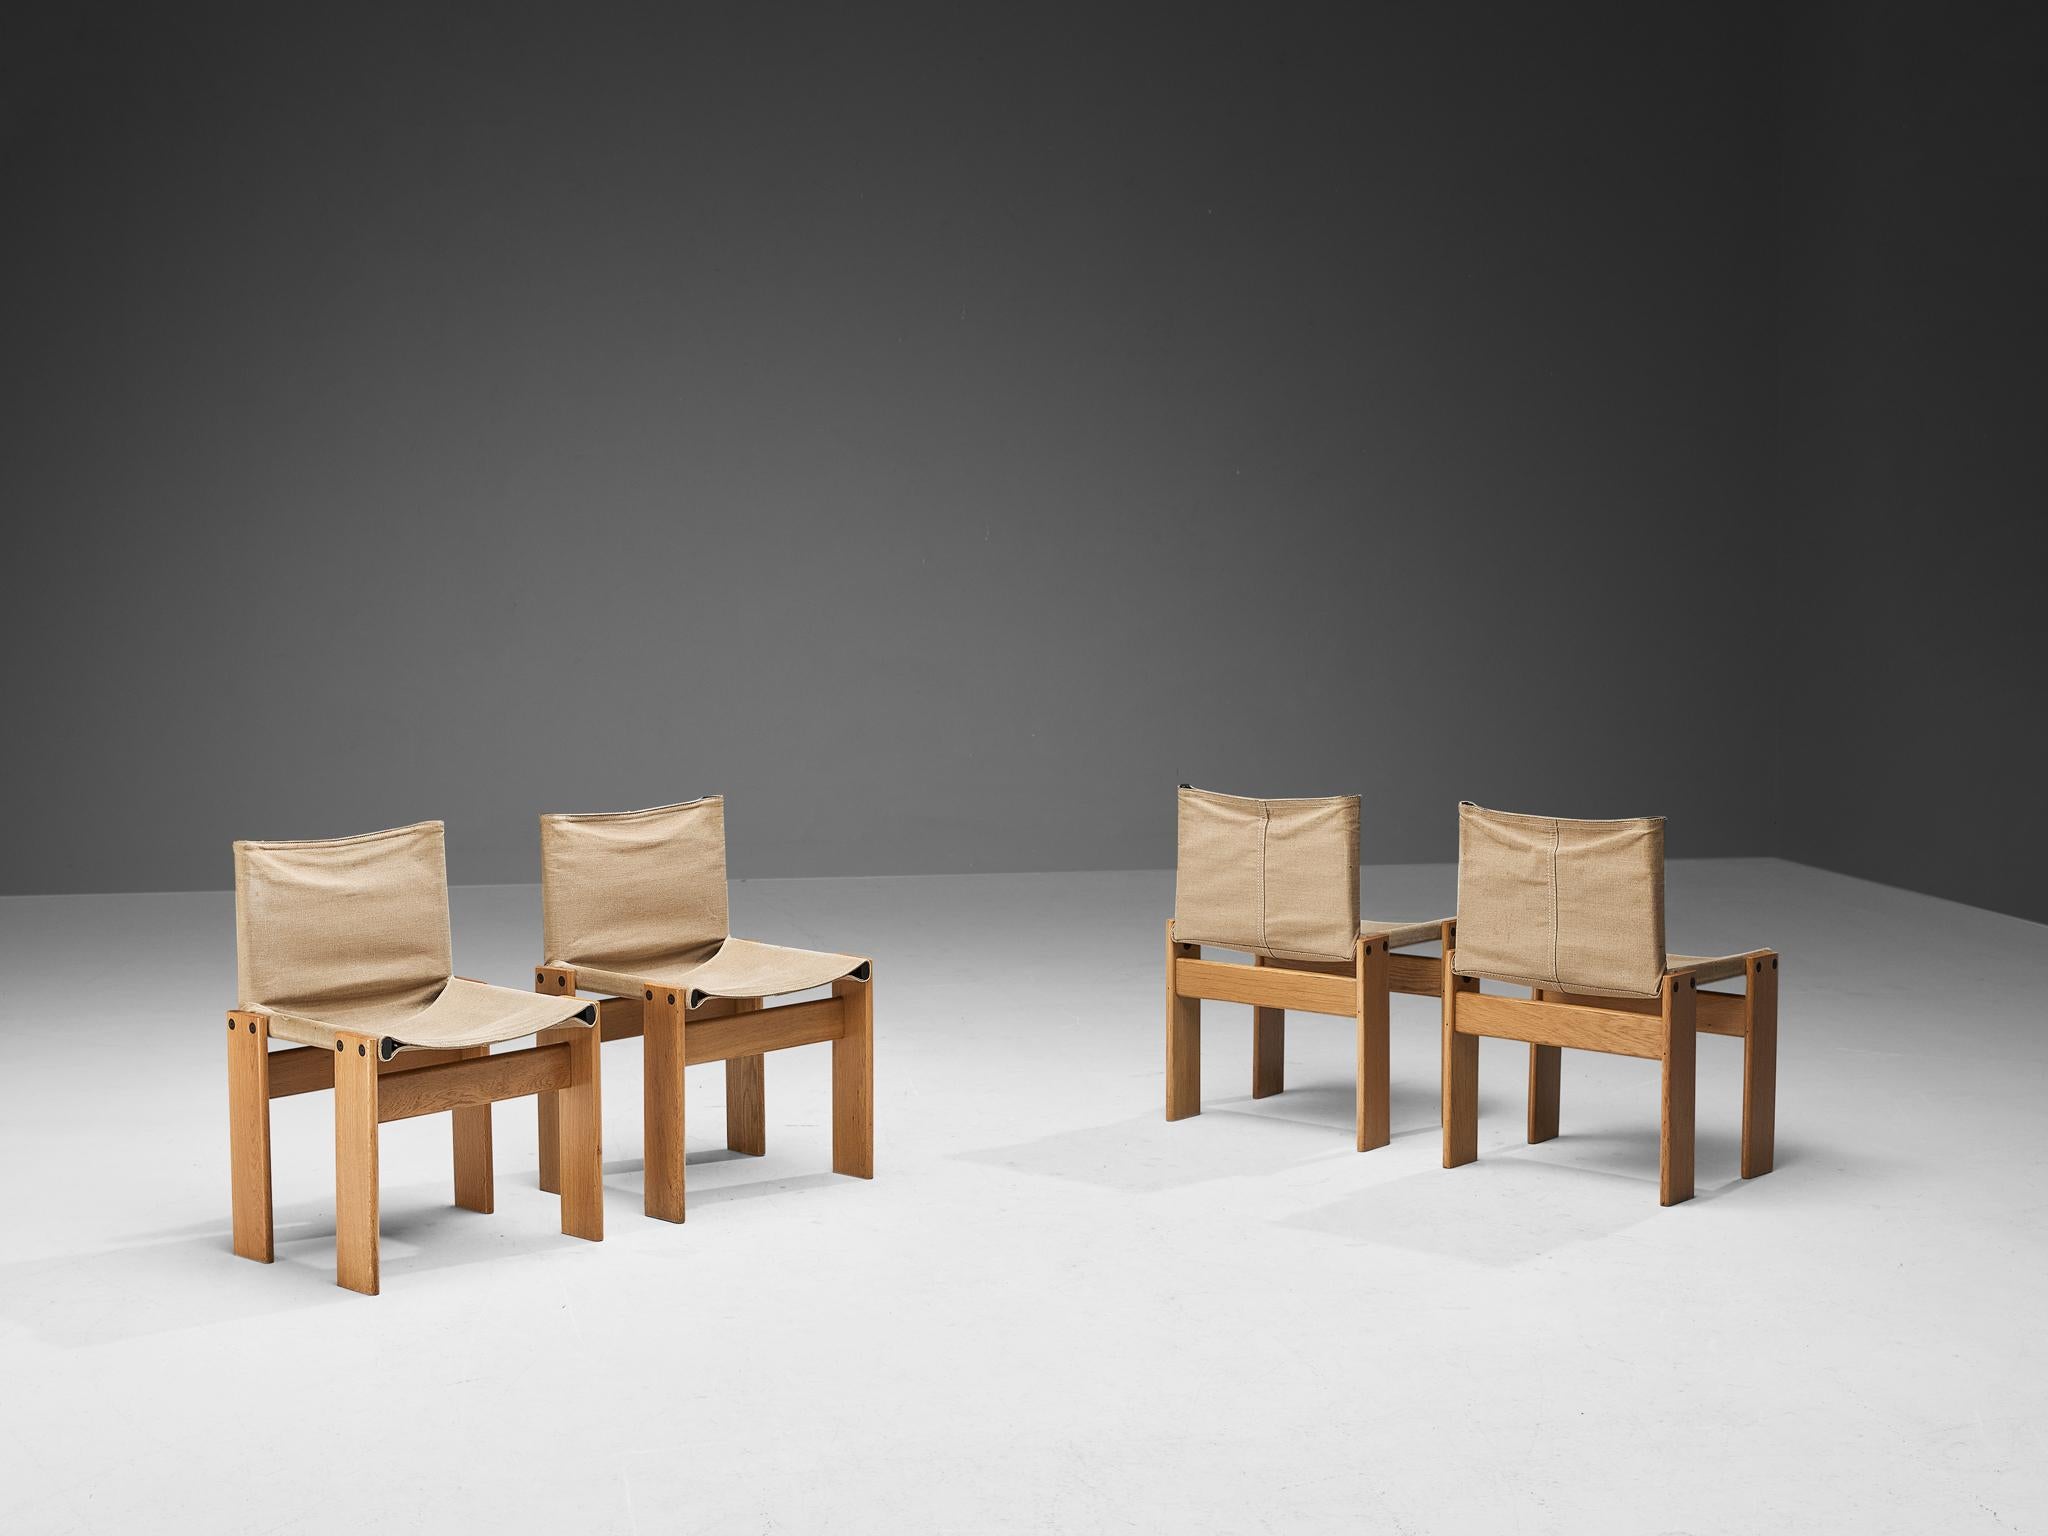 Afra & Tobia Scarpa for Molteni, set of four 'Monk' dining chairs, patinated beech, canvas, Italy, designed in 1974 

Lovely set of four dining chairs in a light canvas that forms a striking combination with the blond beech wood. Interesting is the